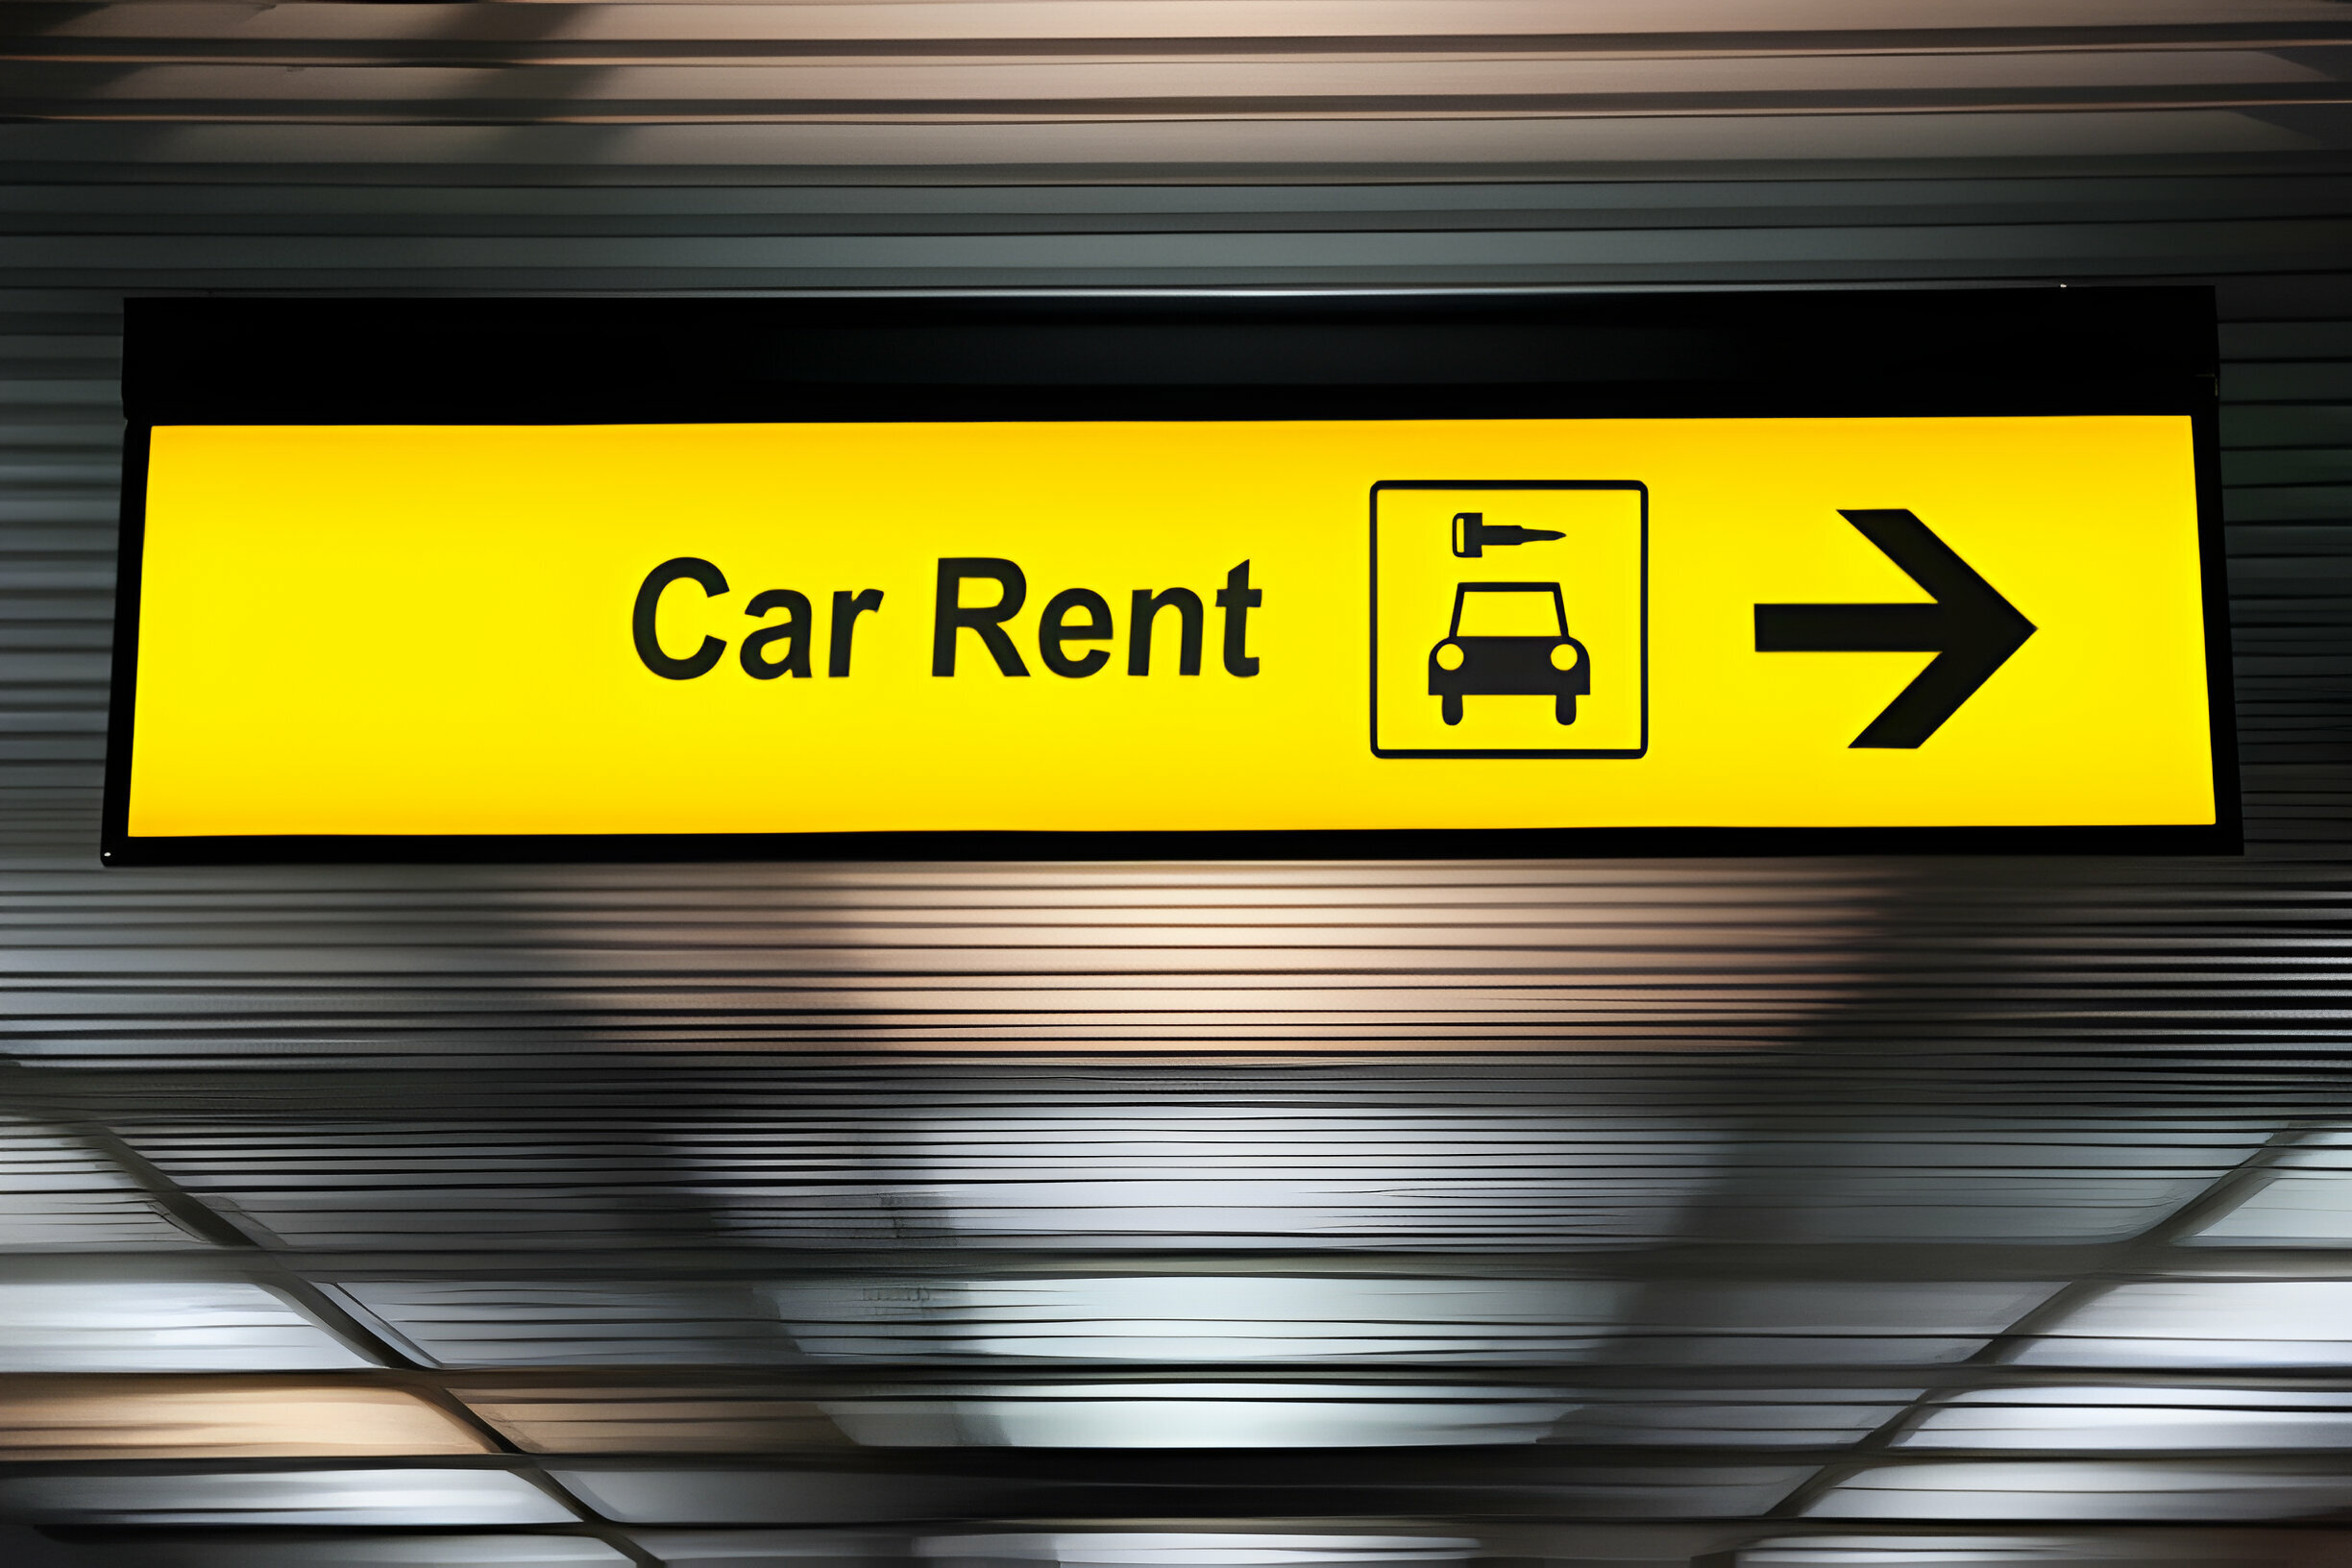 Houston’s Best Car Rentals How to Choose the Right One